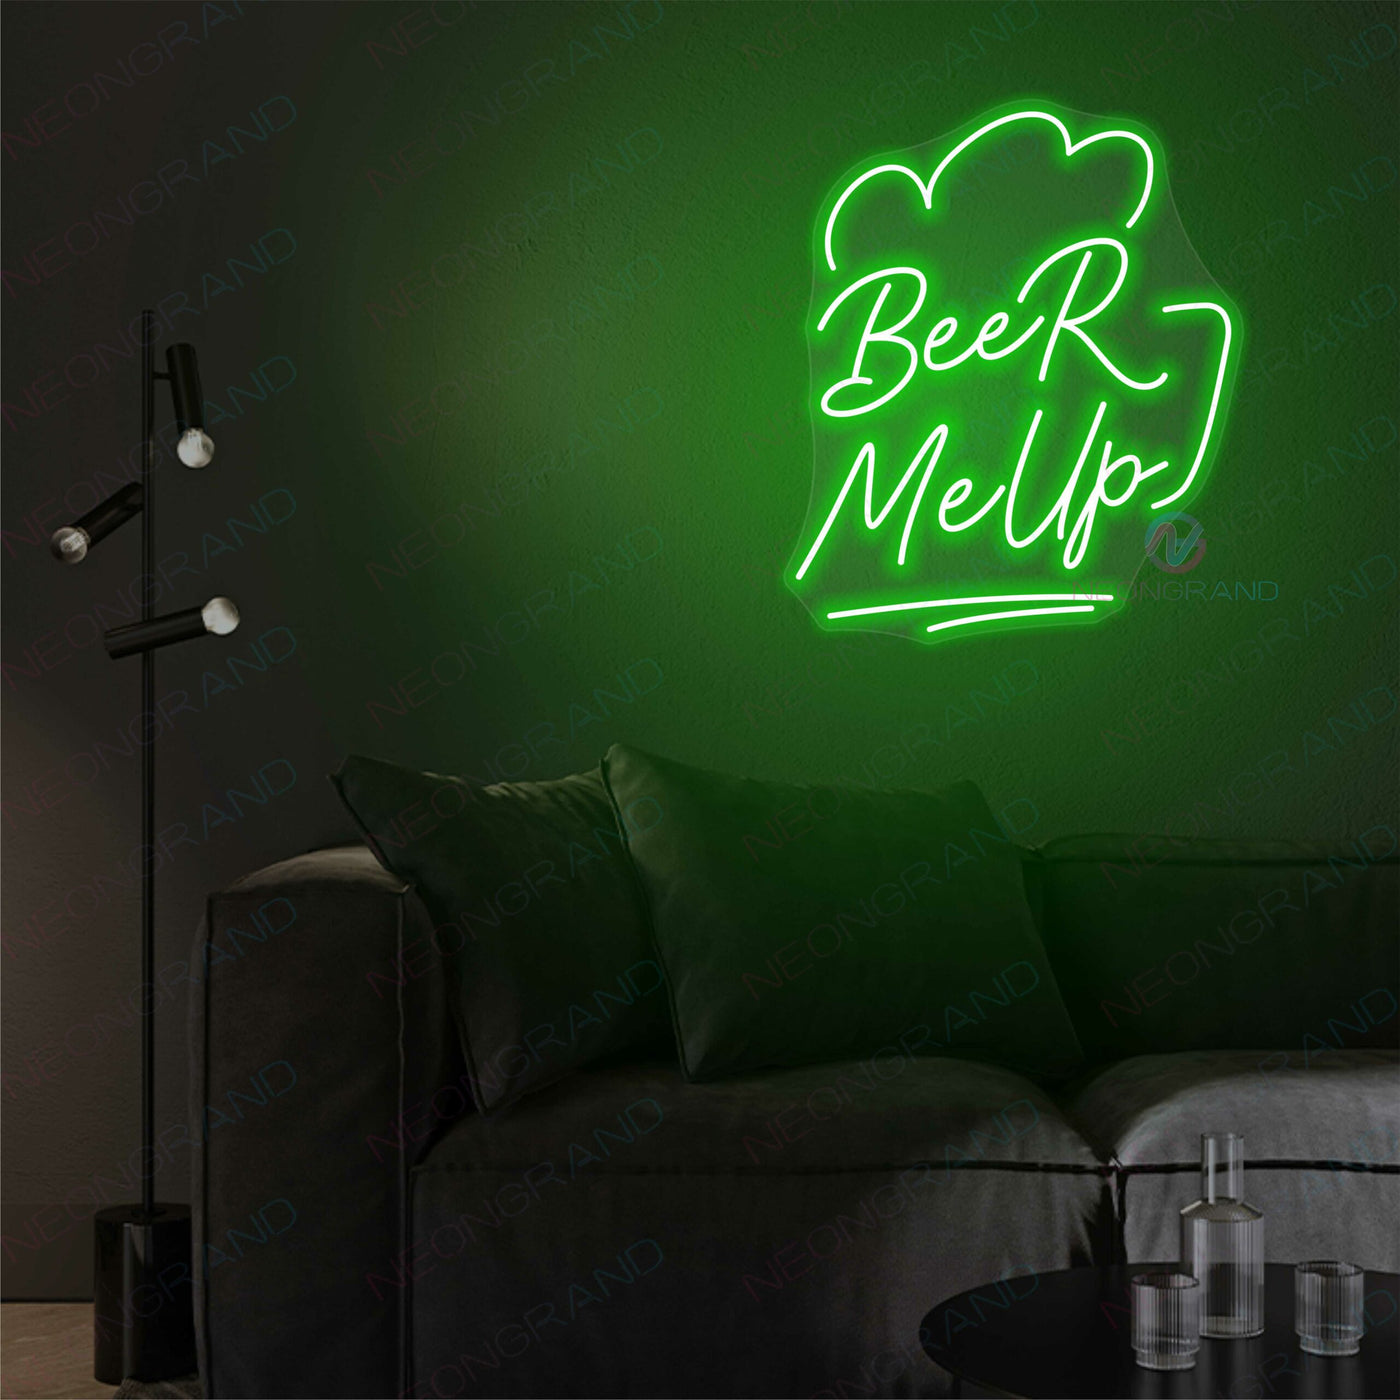 Beer Neon Sign Beer Me Up Drinking Led Light GREEN